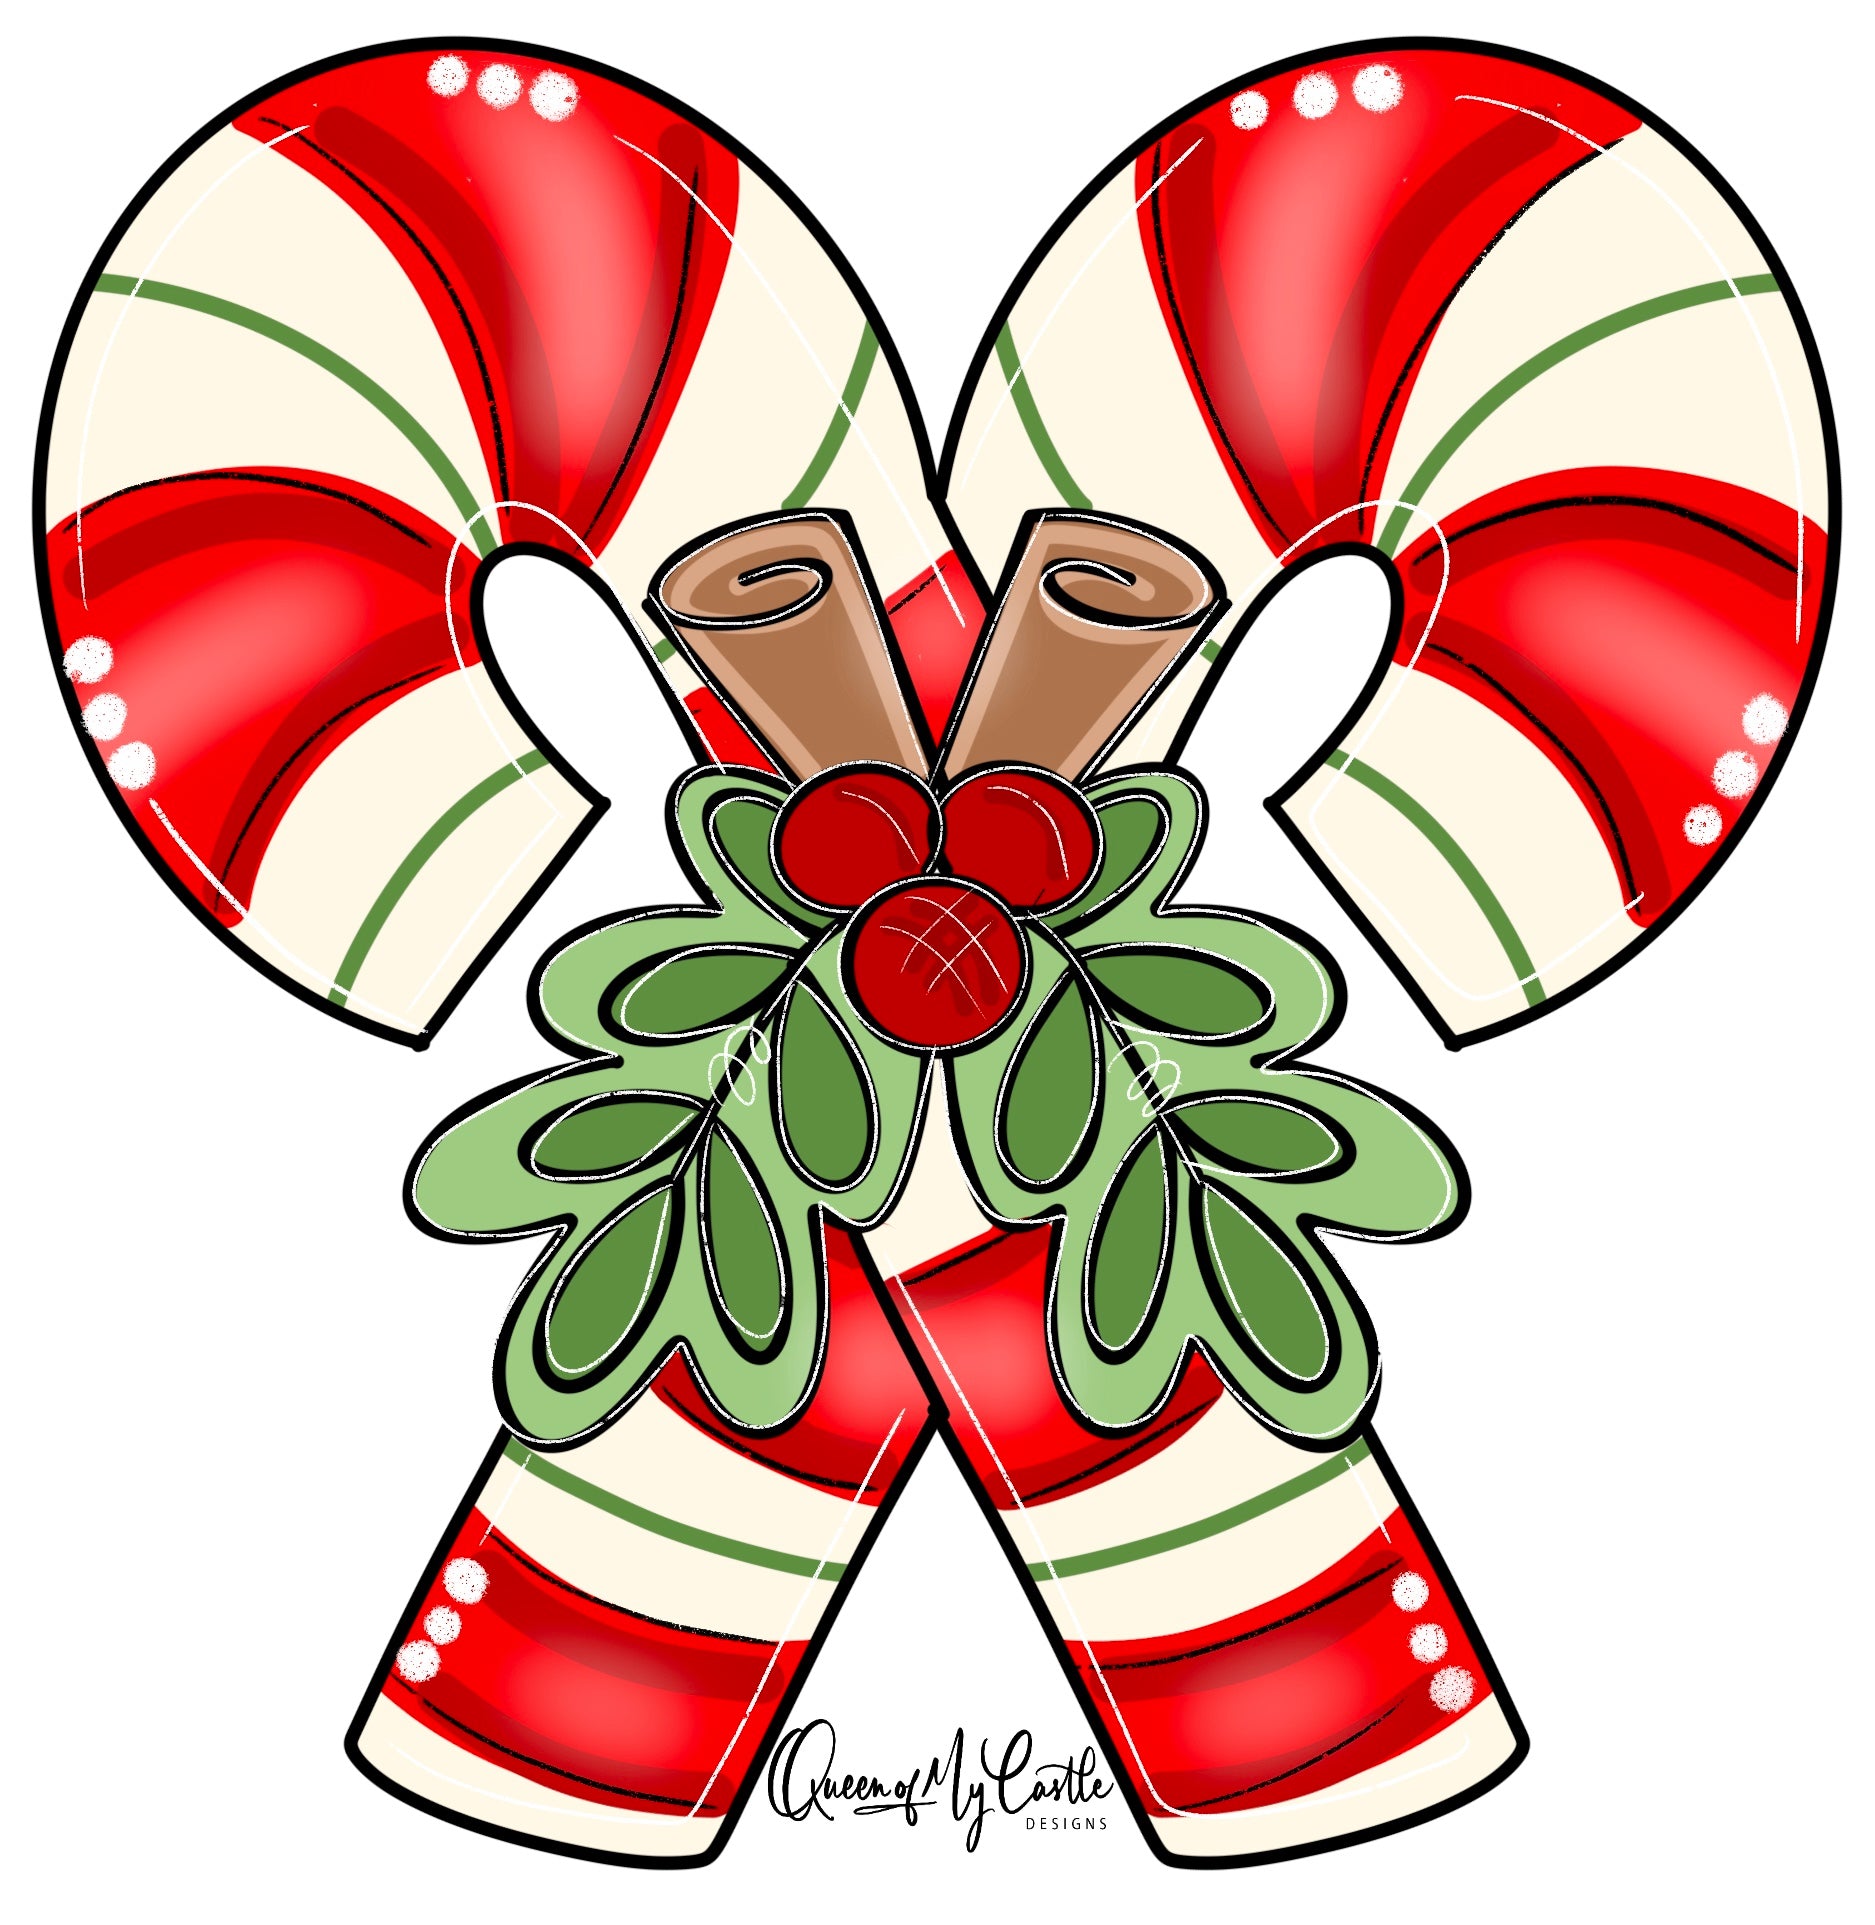 Door hanger template in the shape of two overlapping candy canes with mistletoe